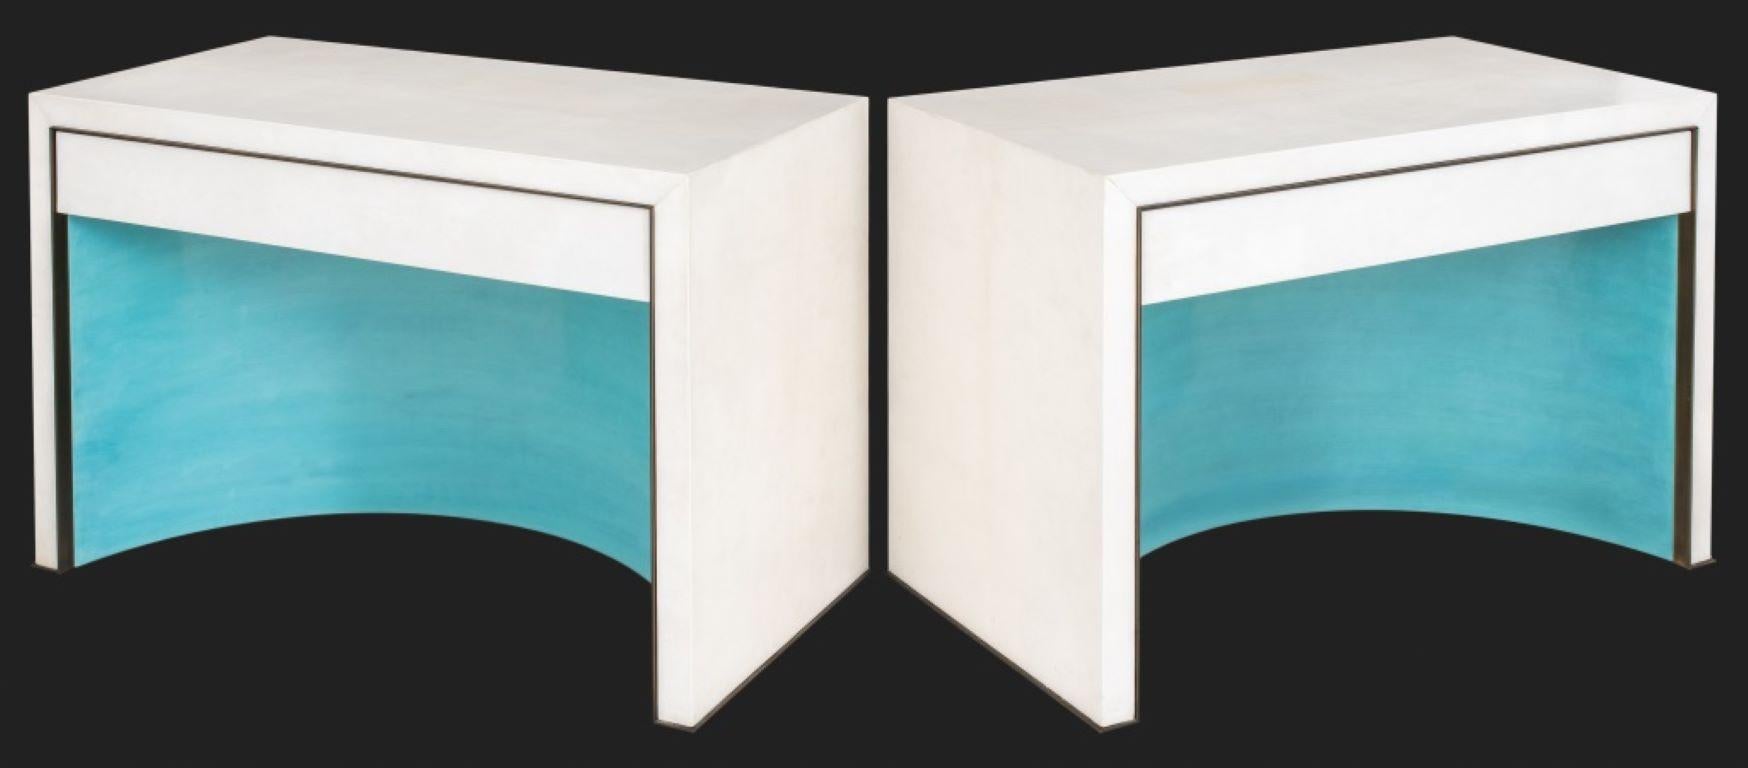 Pair of Jean-Michel Franck (French, 1895-1941) Style Art Deco Revival Leather Clad Side or End Tables with Finished Backs, each with brass encircling Tiffany Robin's Egg blue interior and one drawer.

Dealer: S138XX